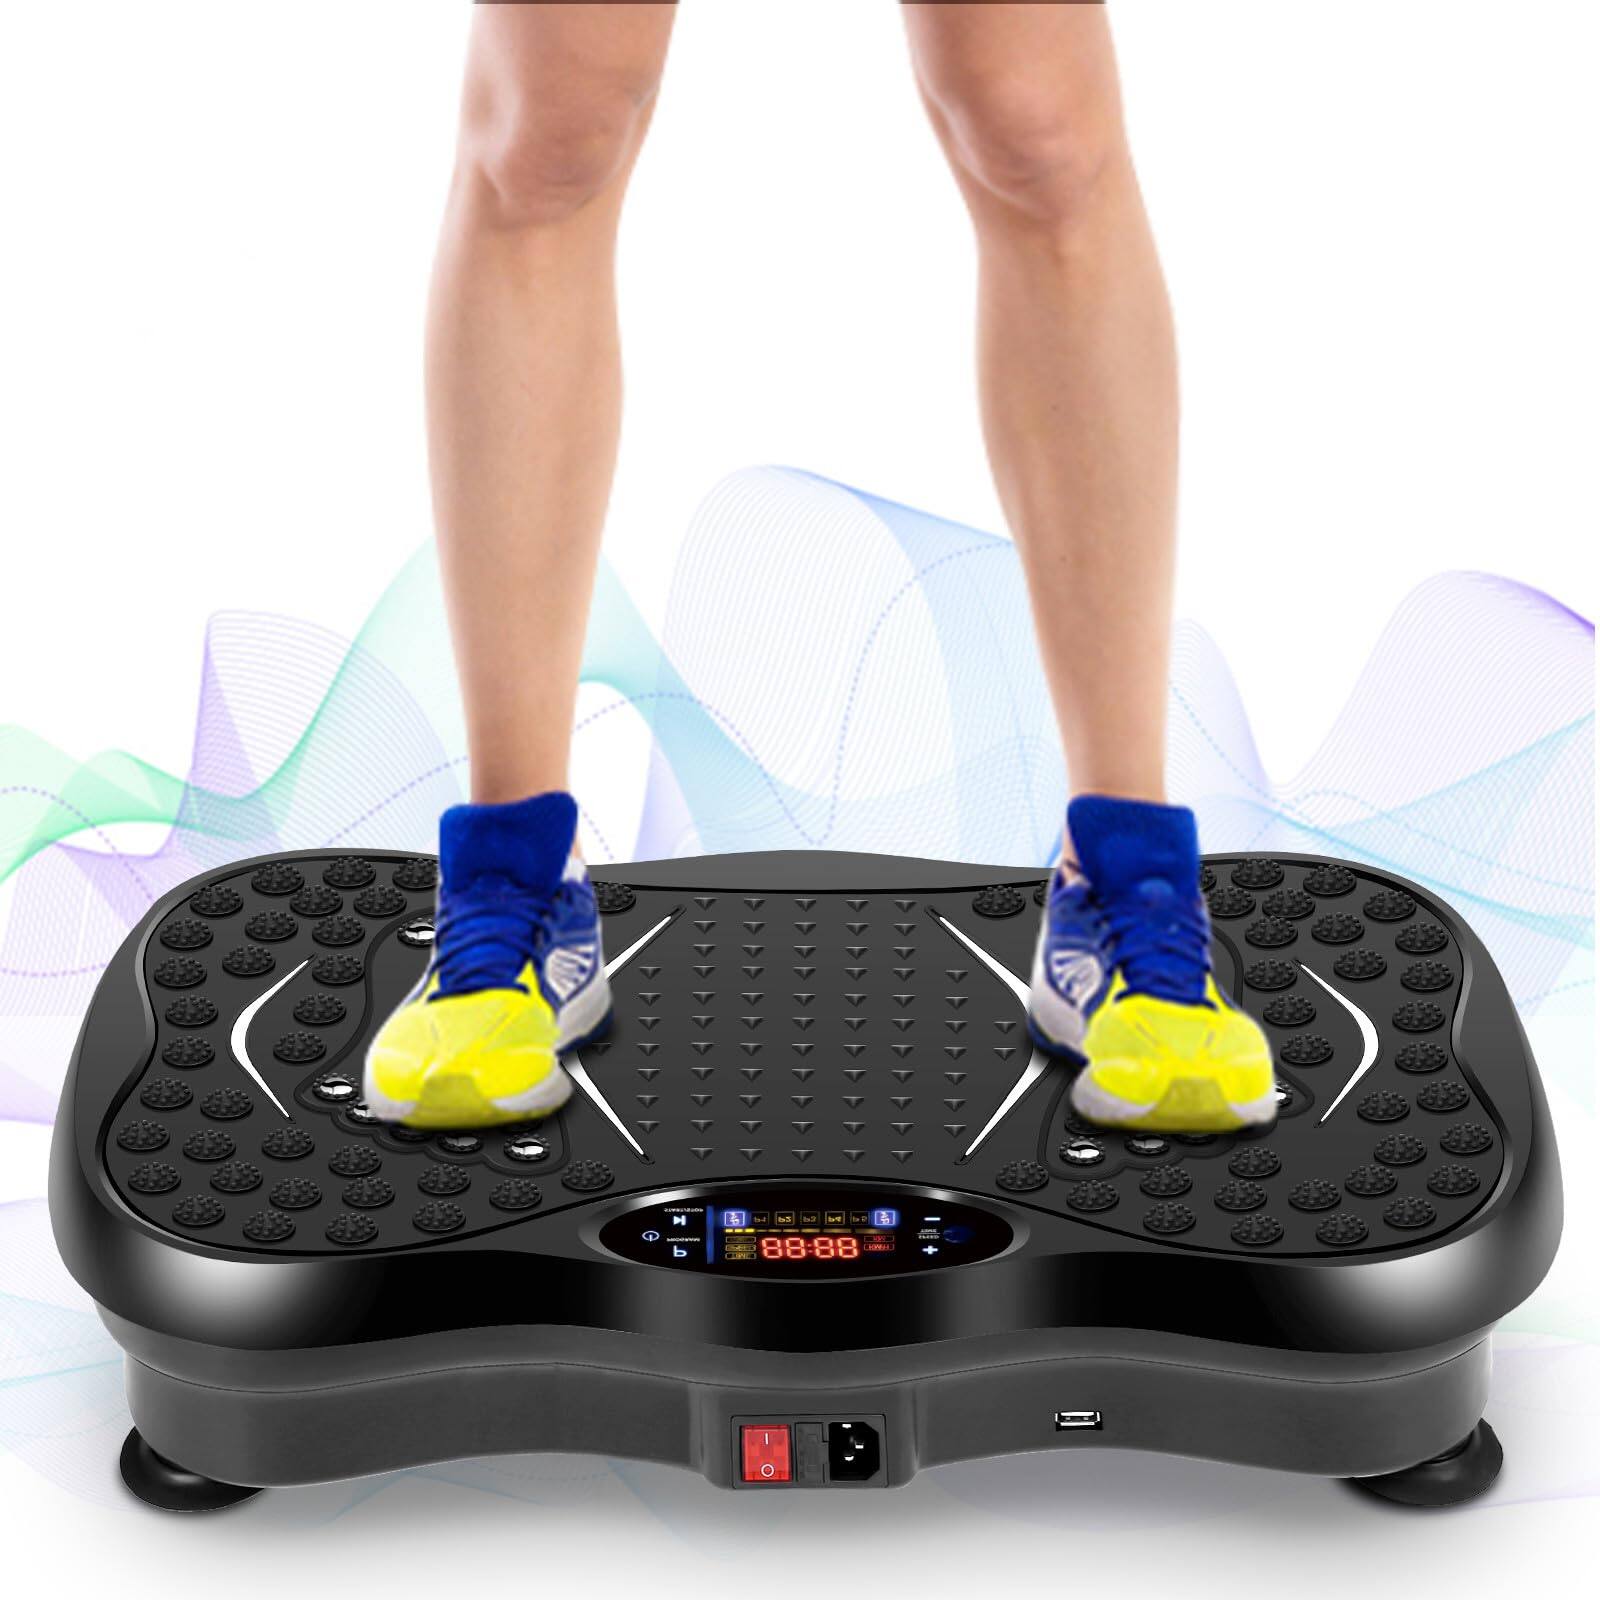 Vibration Plates, Vibration Fitness Exercise Machine for Home Use, with Bluetooth Speaker, 5 Program Modes, 2 Resistance Bands, Vibration Fitness Trainer, 330lb Max Load